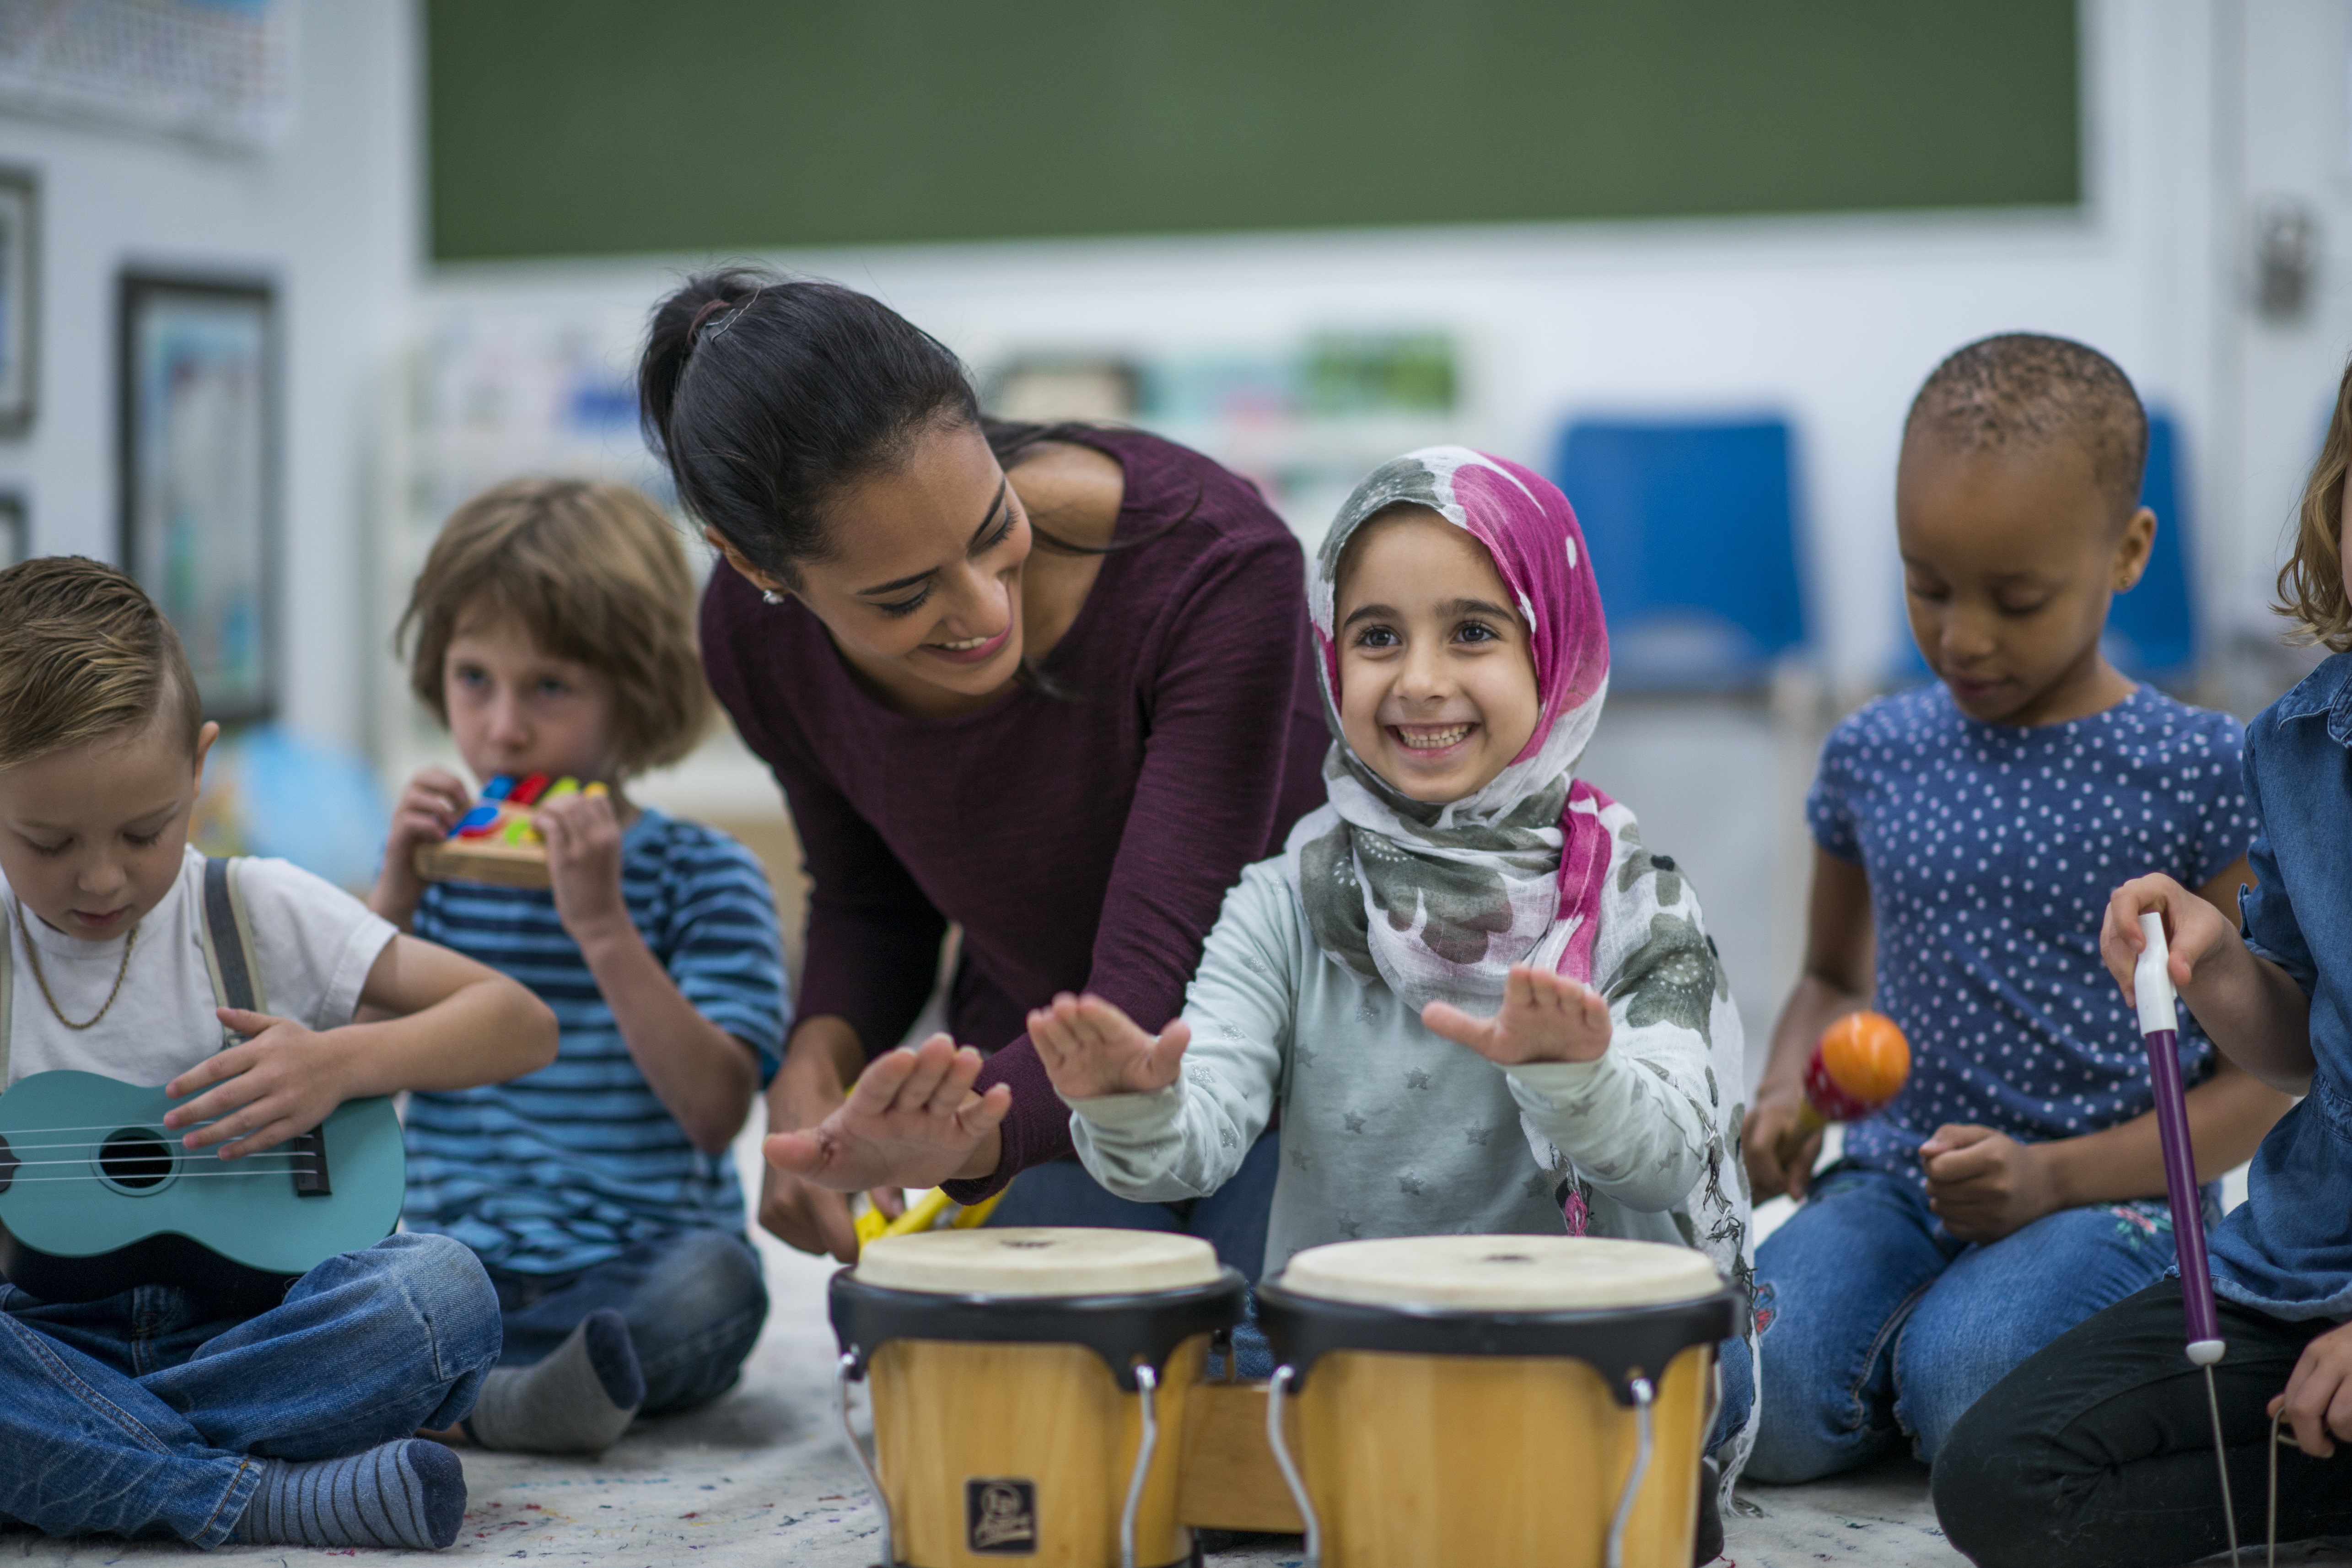 A young girl in a headscarf in a percussion class. She is playing the bongos with her female teacher alongside her.